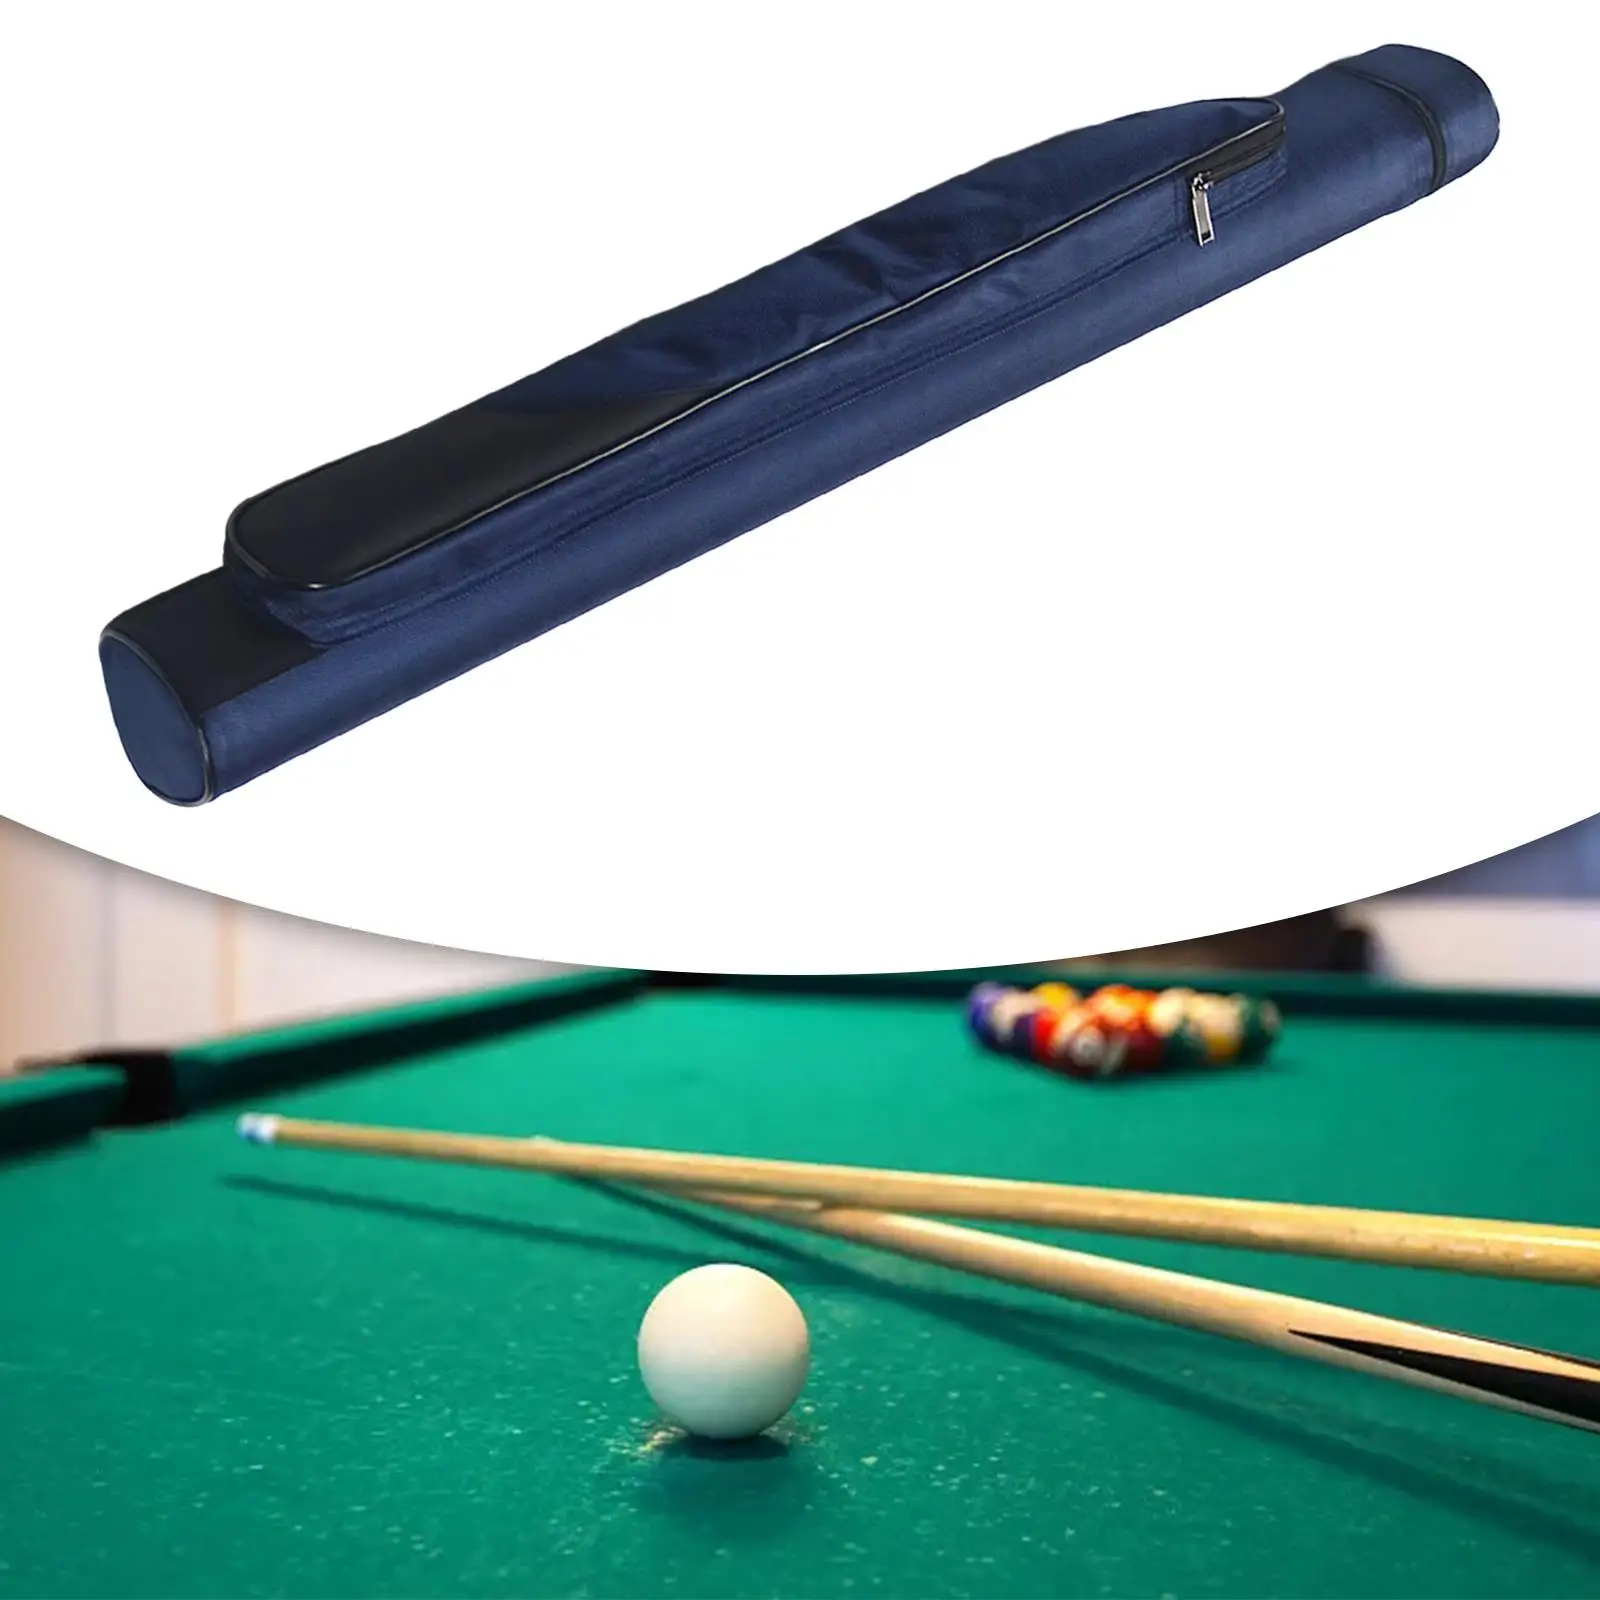 Billiard Pool Cue Stick Carrying Bag Durable Pool Table Accessories with Shoulder Strap 4 Holes Pool Cue Cases Pool Cue Carrier